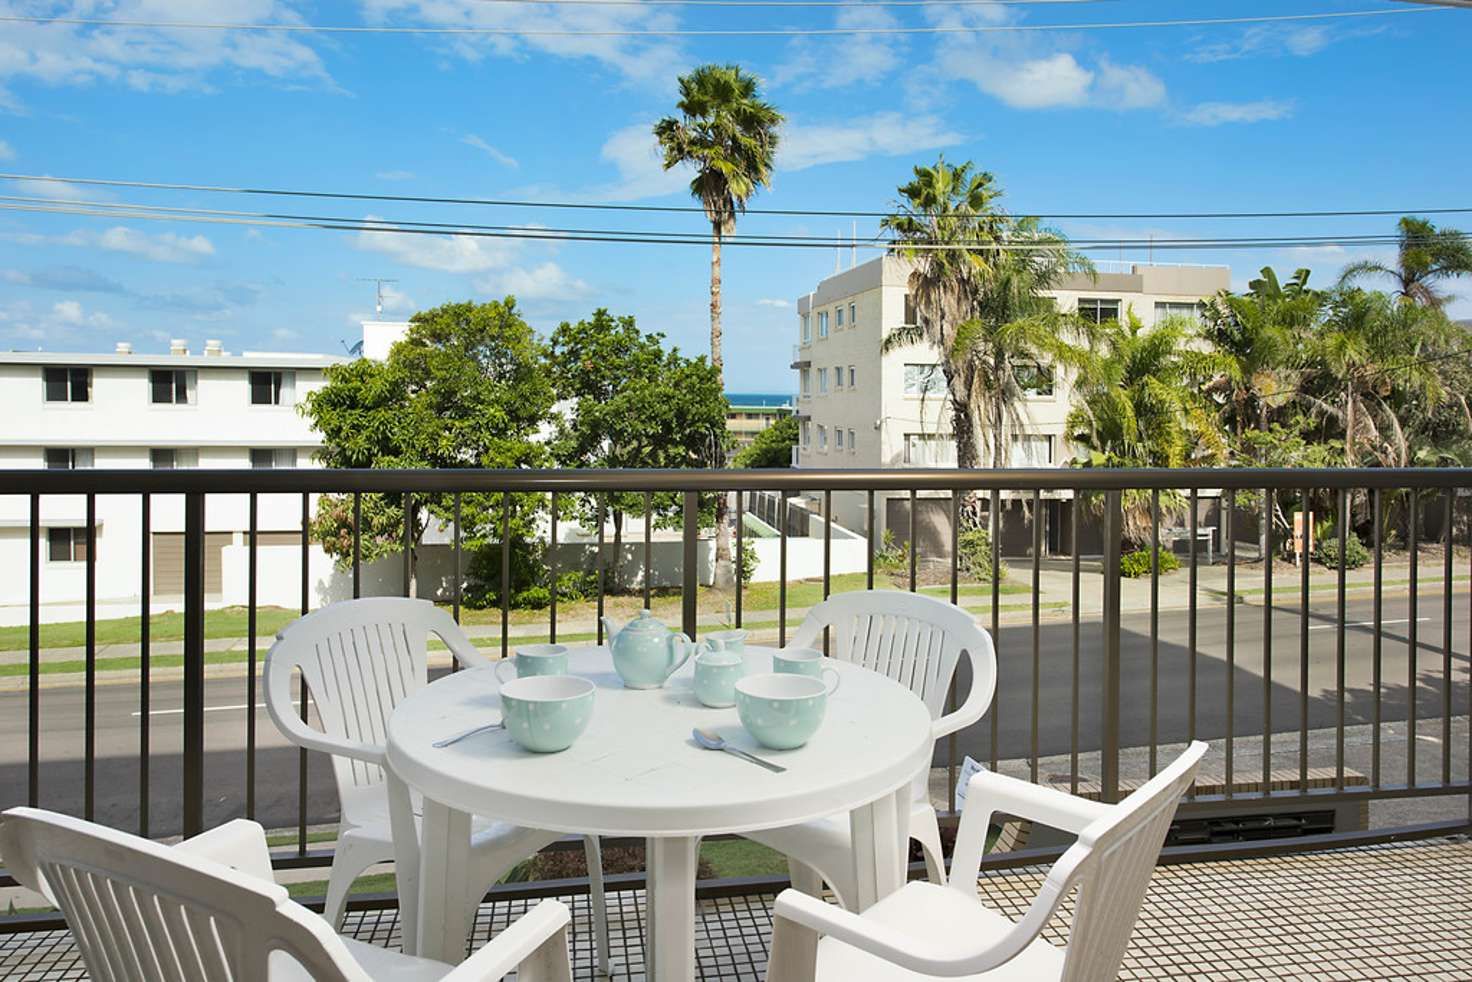 2/14 Warne Tce - Oceanic Apartments, Kings Beach QLD 4551, Image 2